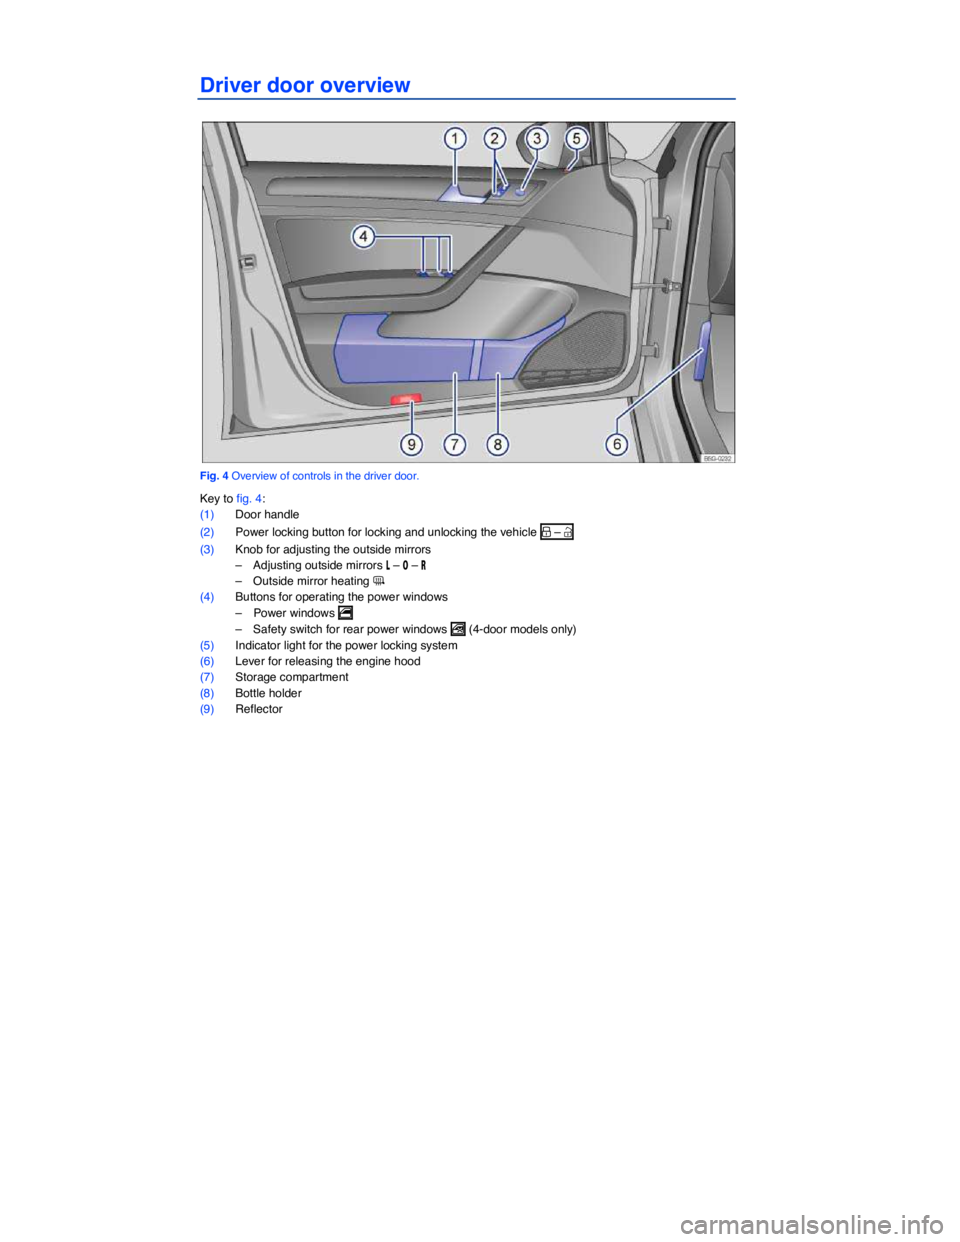 VOLKSWAGEN GOLF 2015  Owner´s Manual Driver door overview 
 
Fig. 4 Overview of controls in the driver door. 
Key to fig. 4: 
(1) Door handle  
(2) Power locking button for locking and unlocking the vehicle �